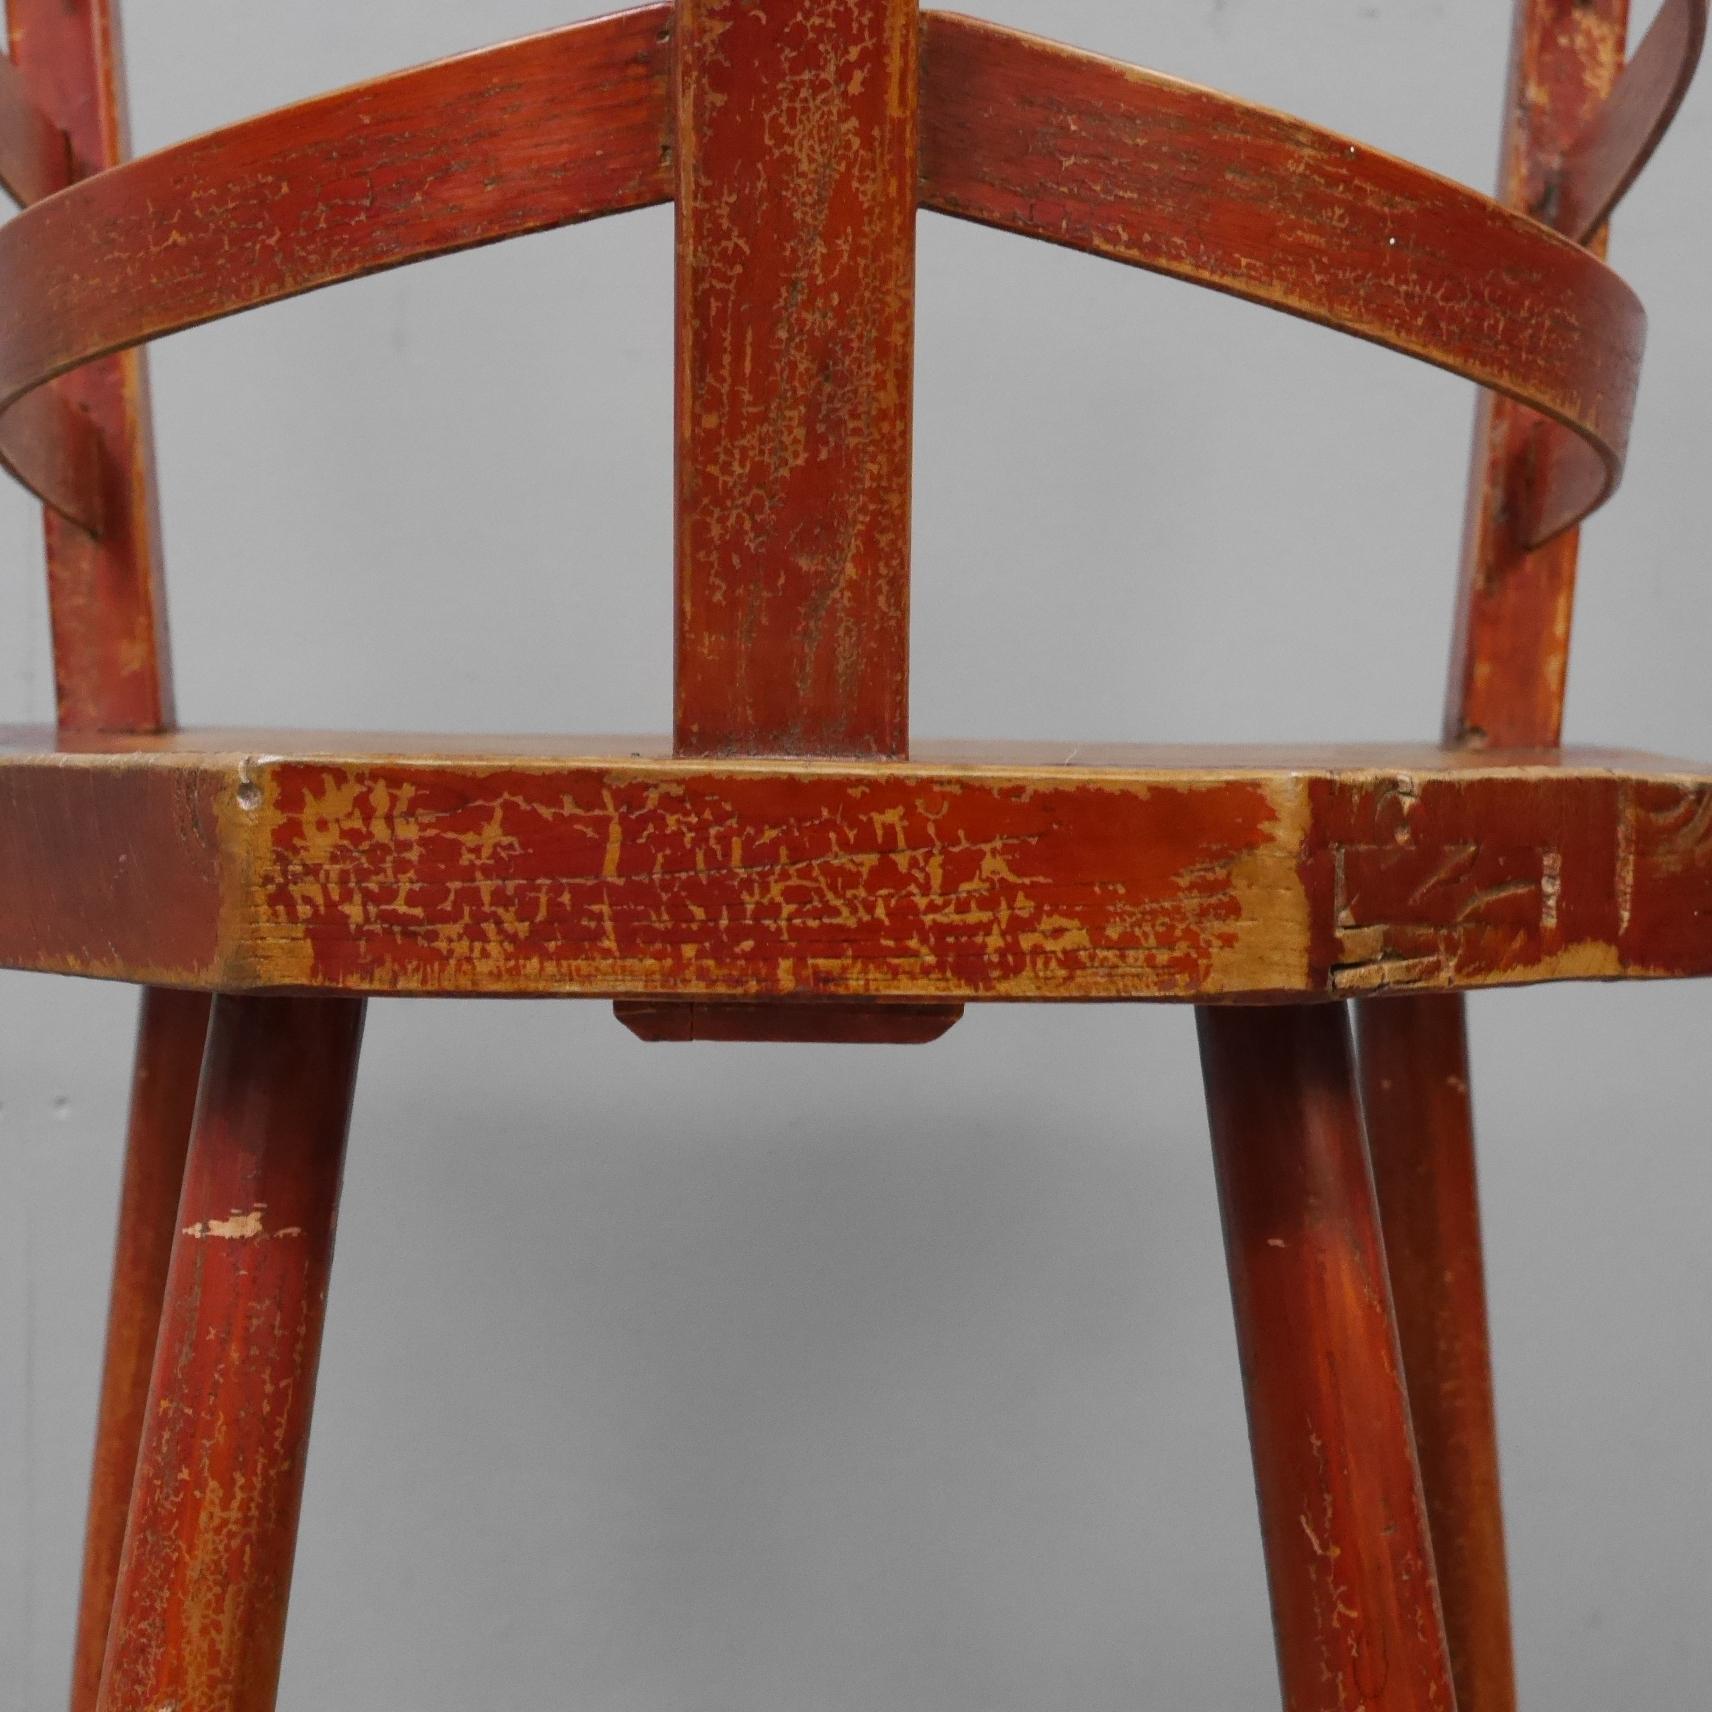 An Irish vernacular Boat Builders chair.
A beautifully made chair of excellent form & colour, the thick slab seat raised on four turned legs & supporting the unique back rest with steam bent 'ribs'. A beautiful, timeless & high quality piece of